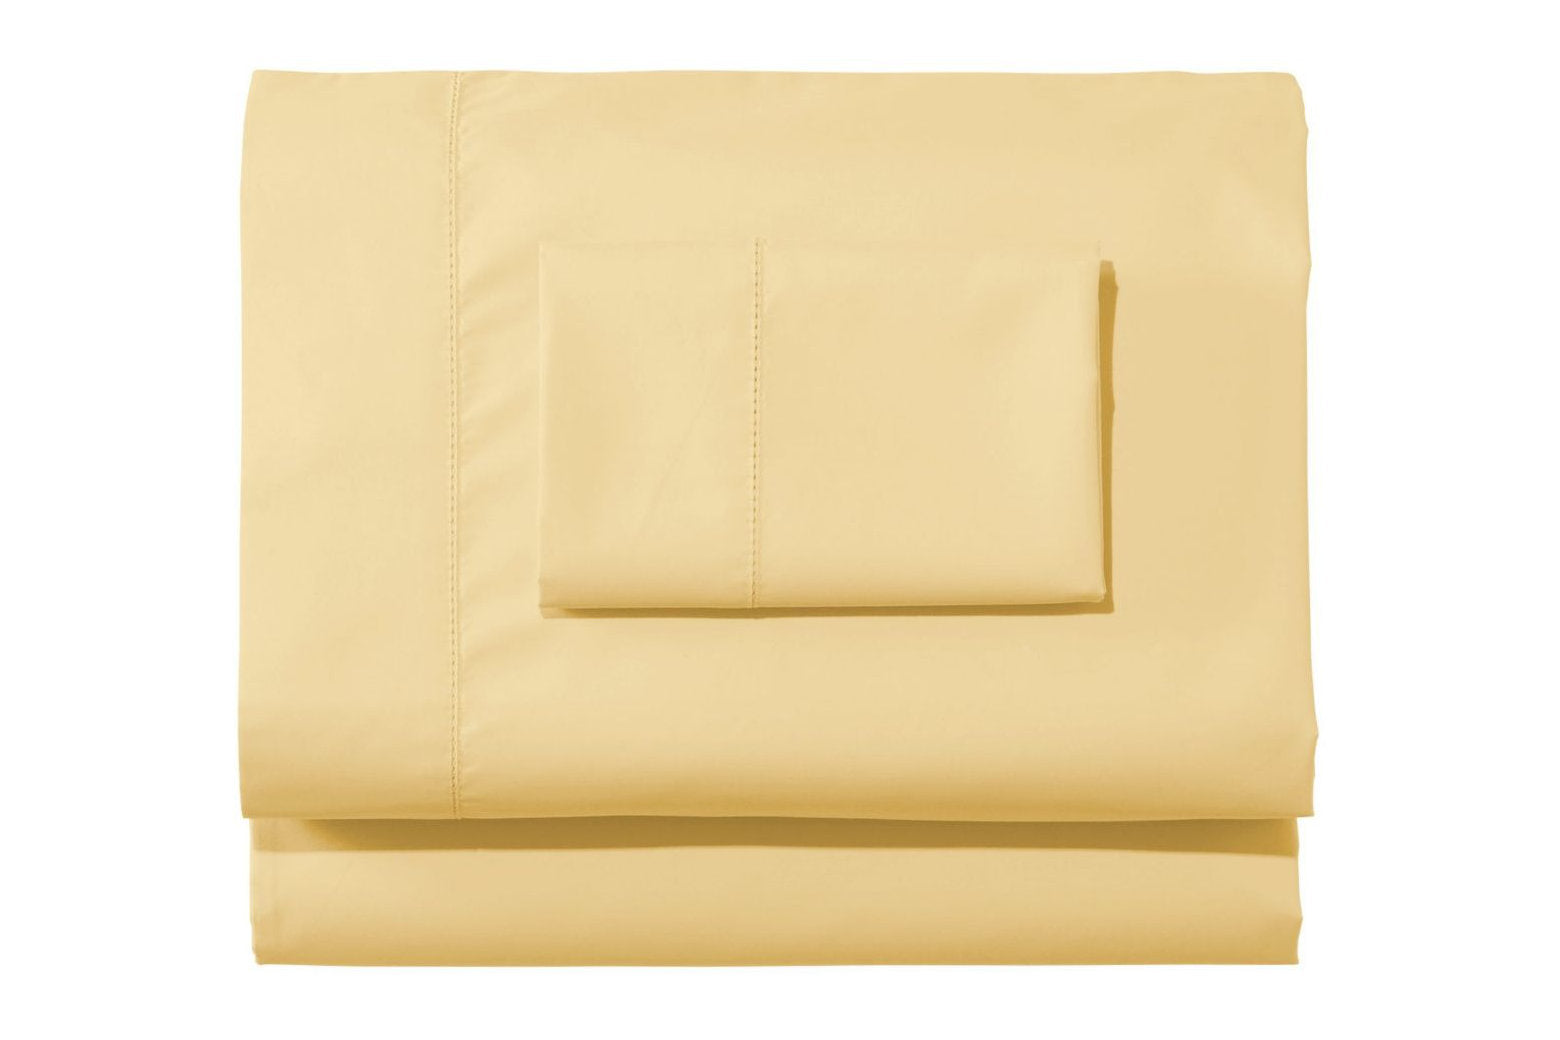 Set of L.L. Bean Cotton Percale Sheet in bright yellow Sunlight color neatly folded